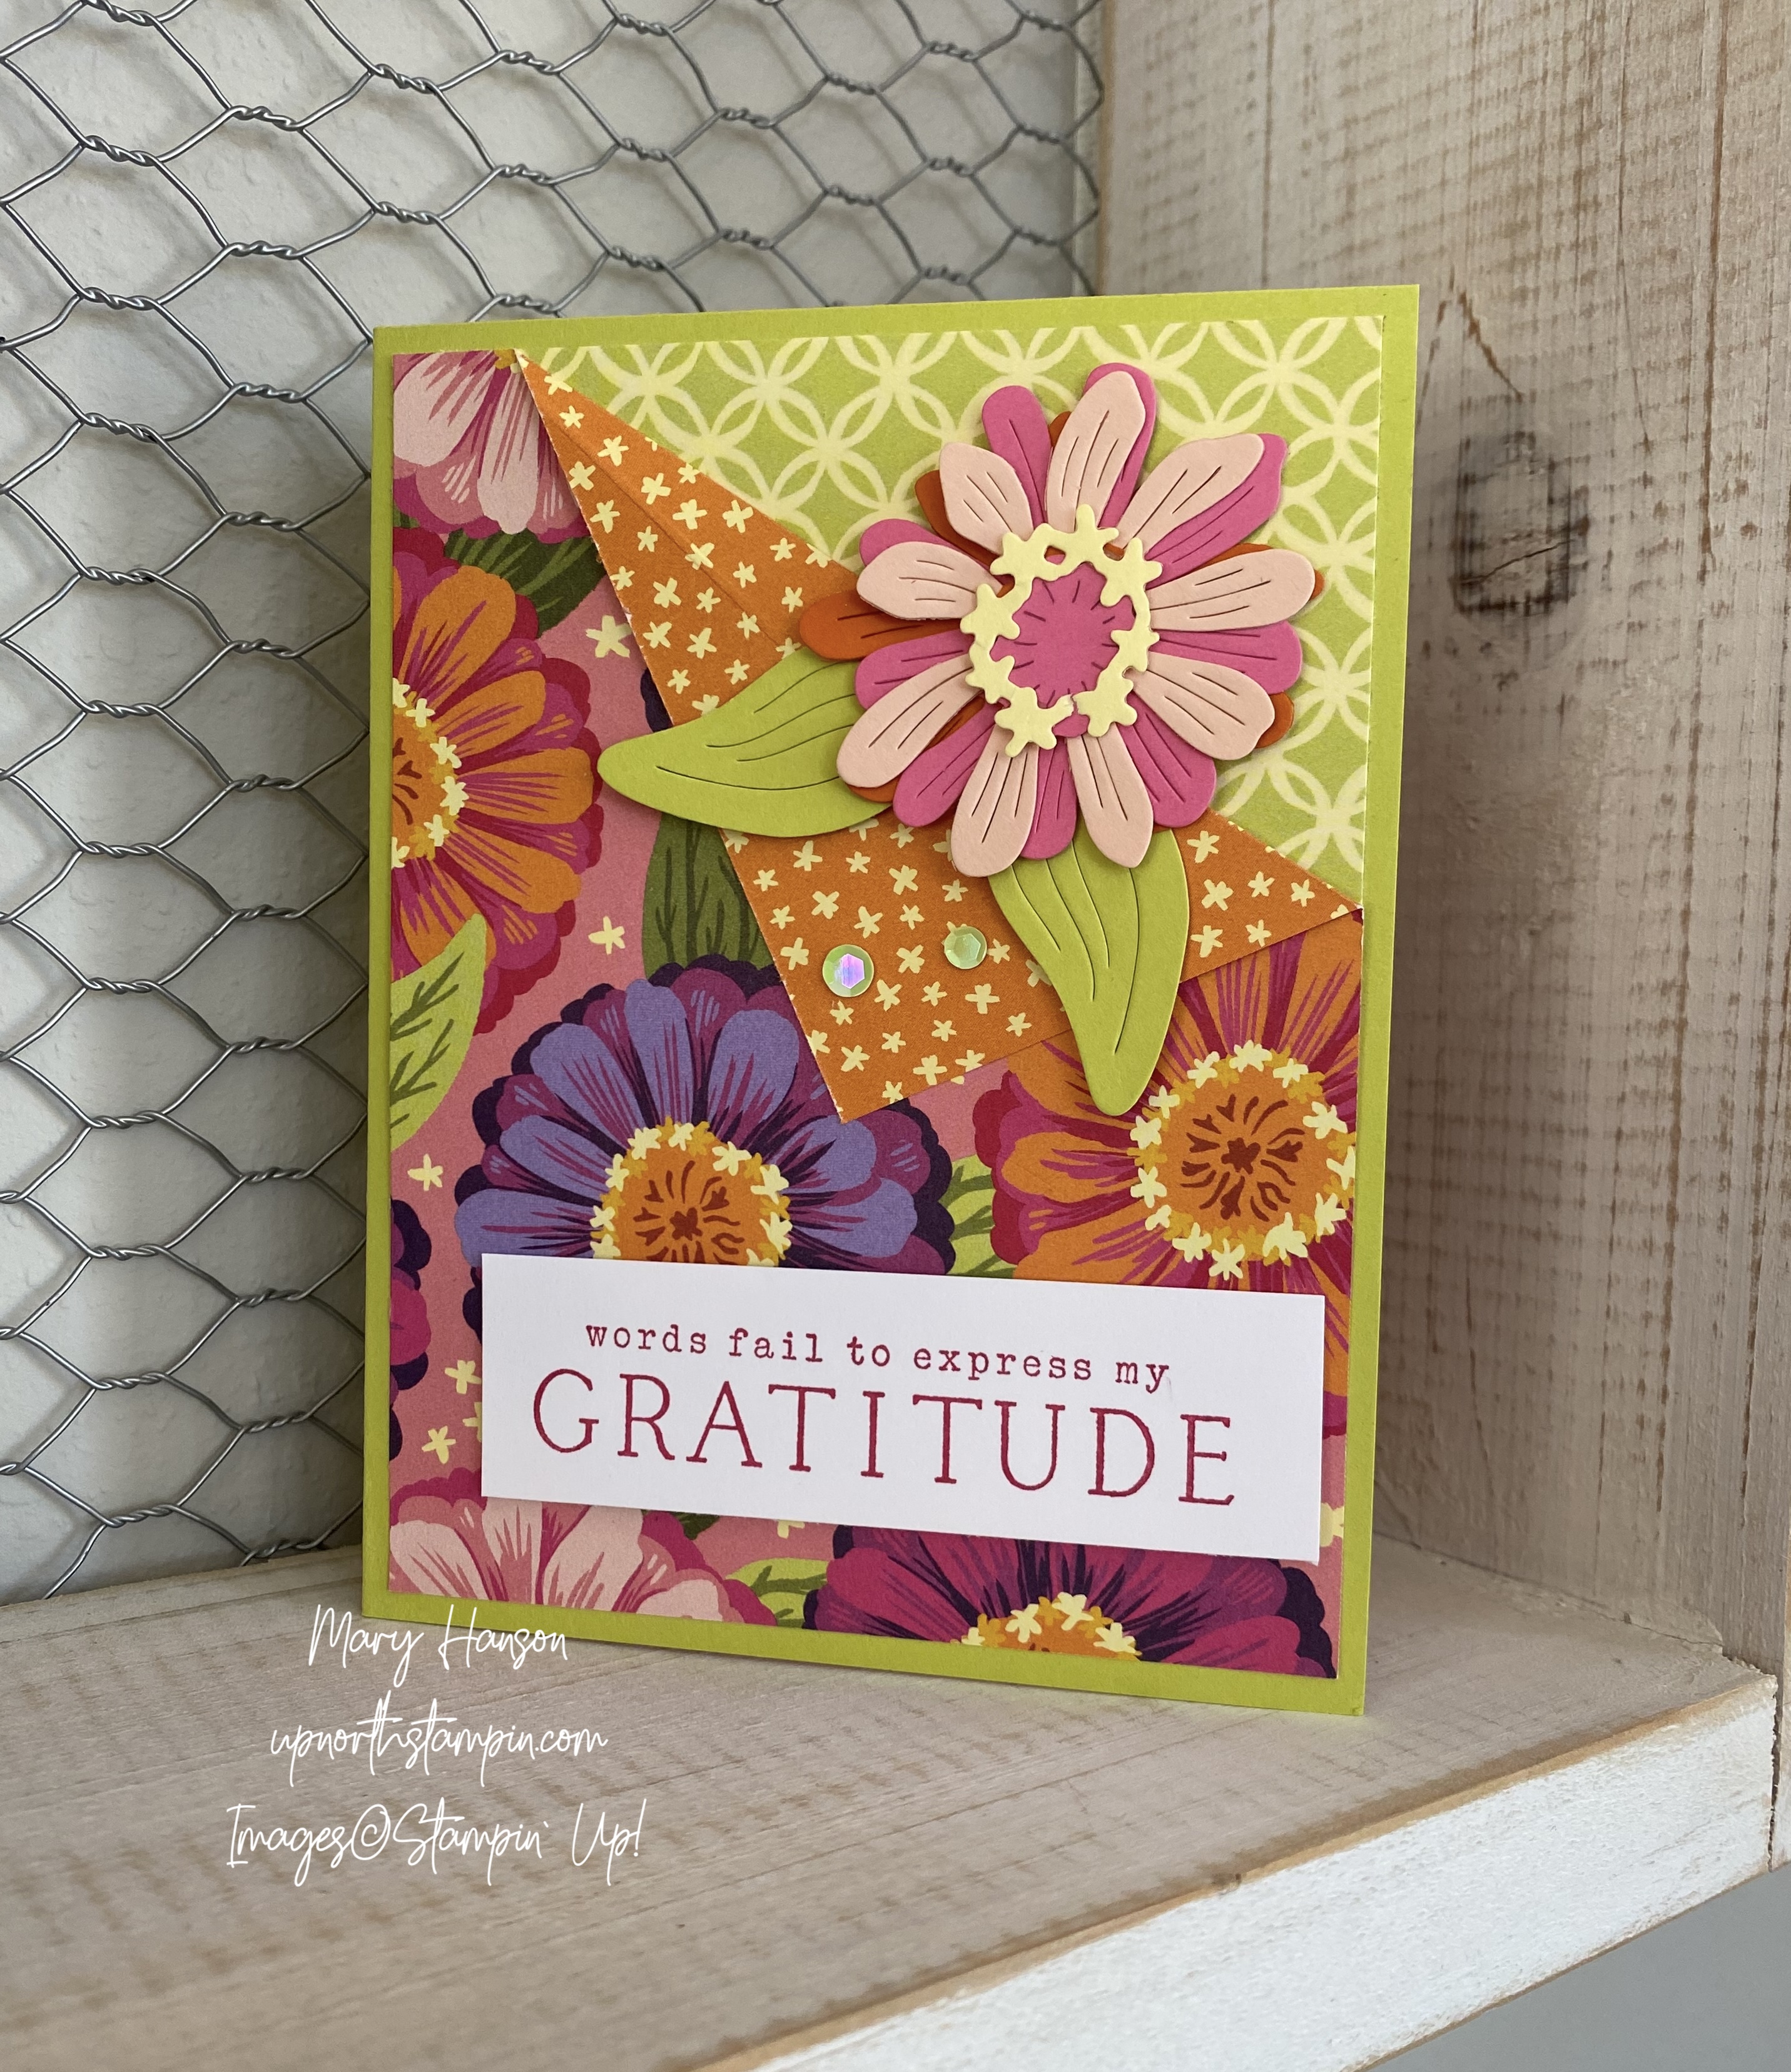 Up North Stampin' – Mary Hanson, Independent Stampin Up! Demonstrator